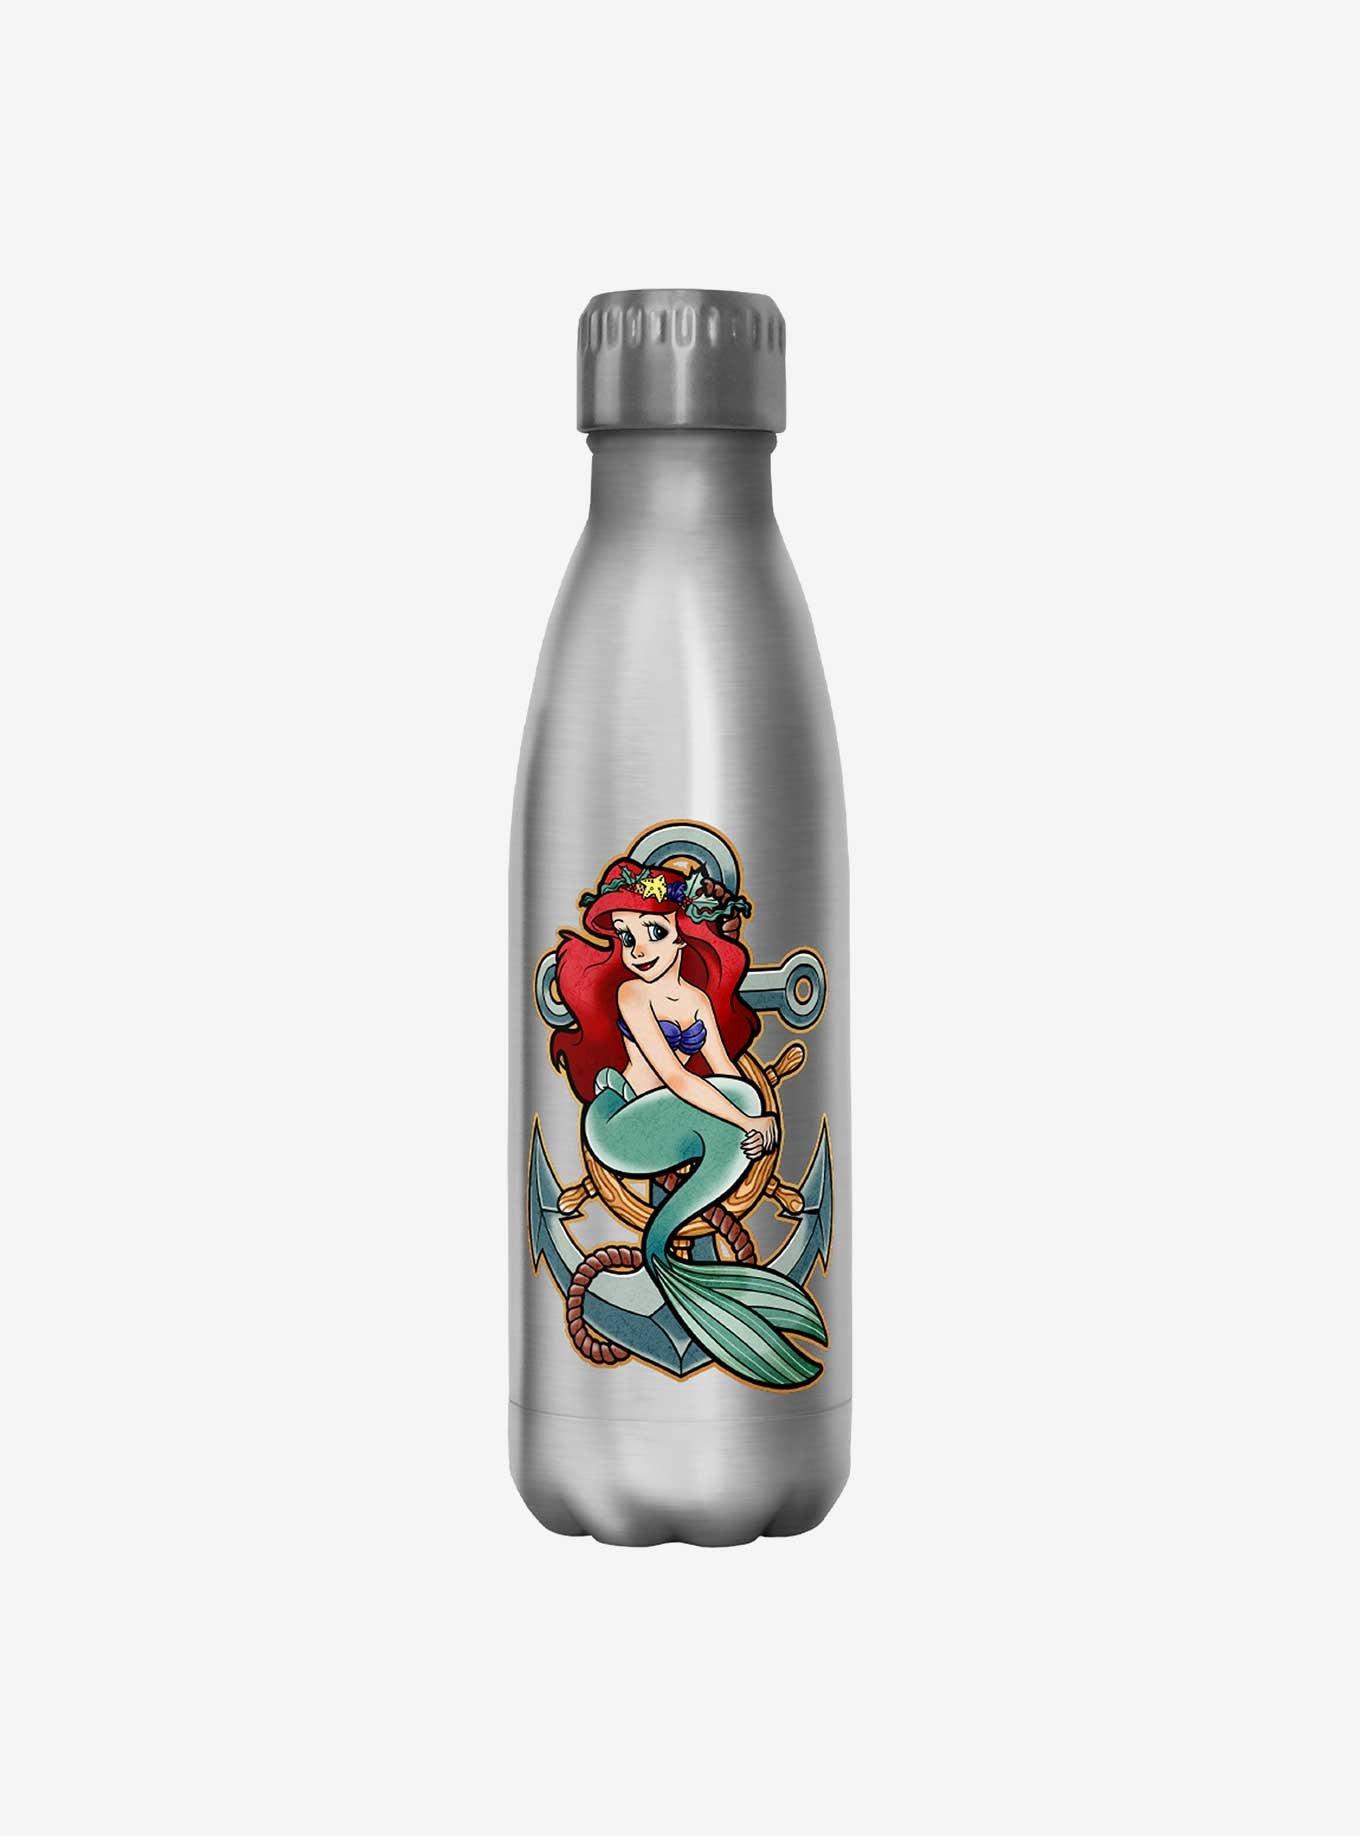 The Little Mermaid Stainless Steel Water Bottle with Built-in Straw Live Action Film - Official shopDisney